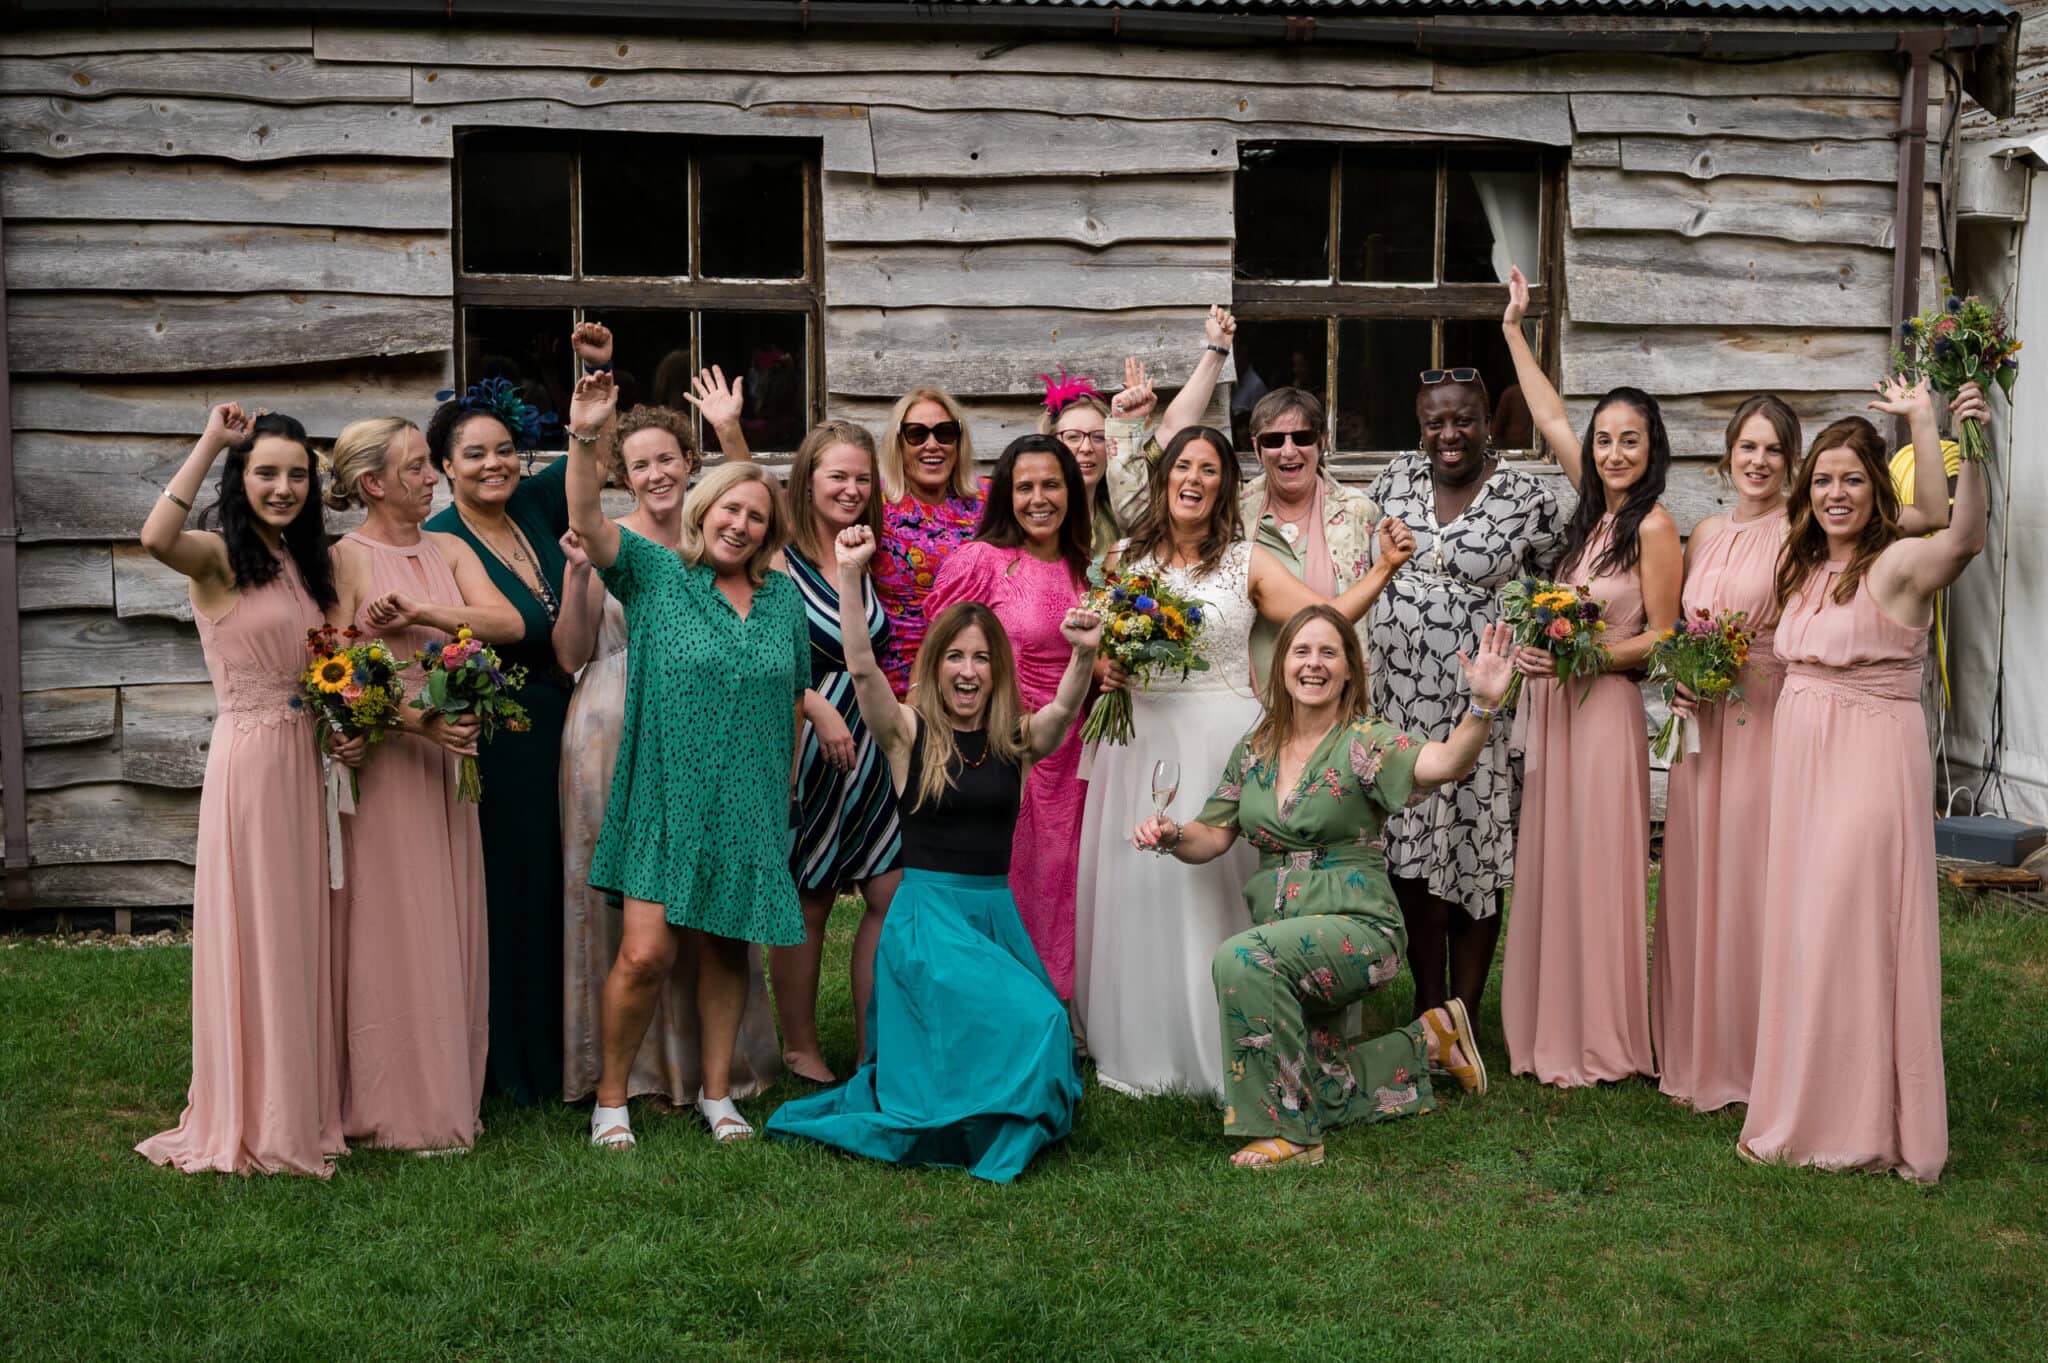 Natural Girls group photo at Weddings in the Wood in The New Forest, UK